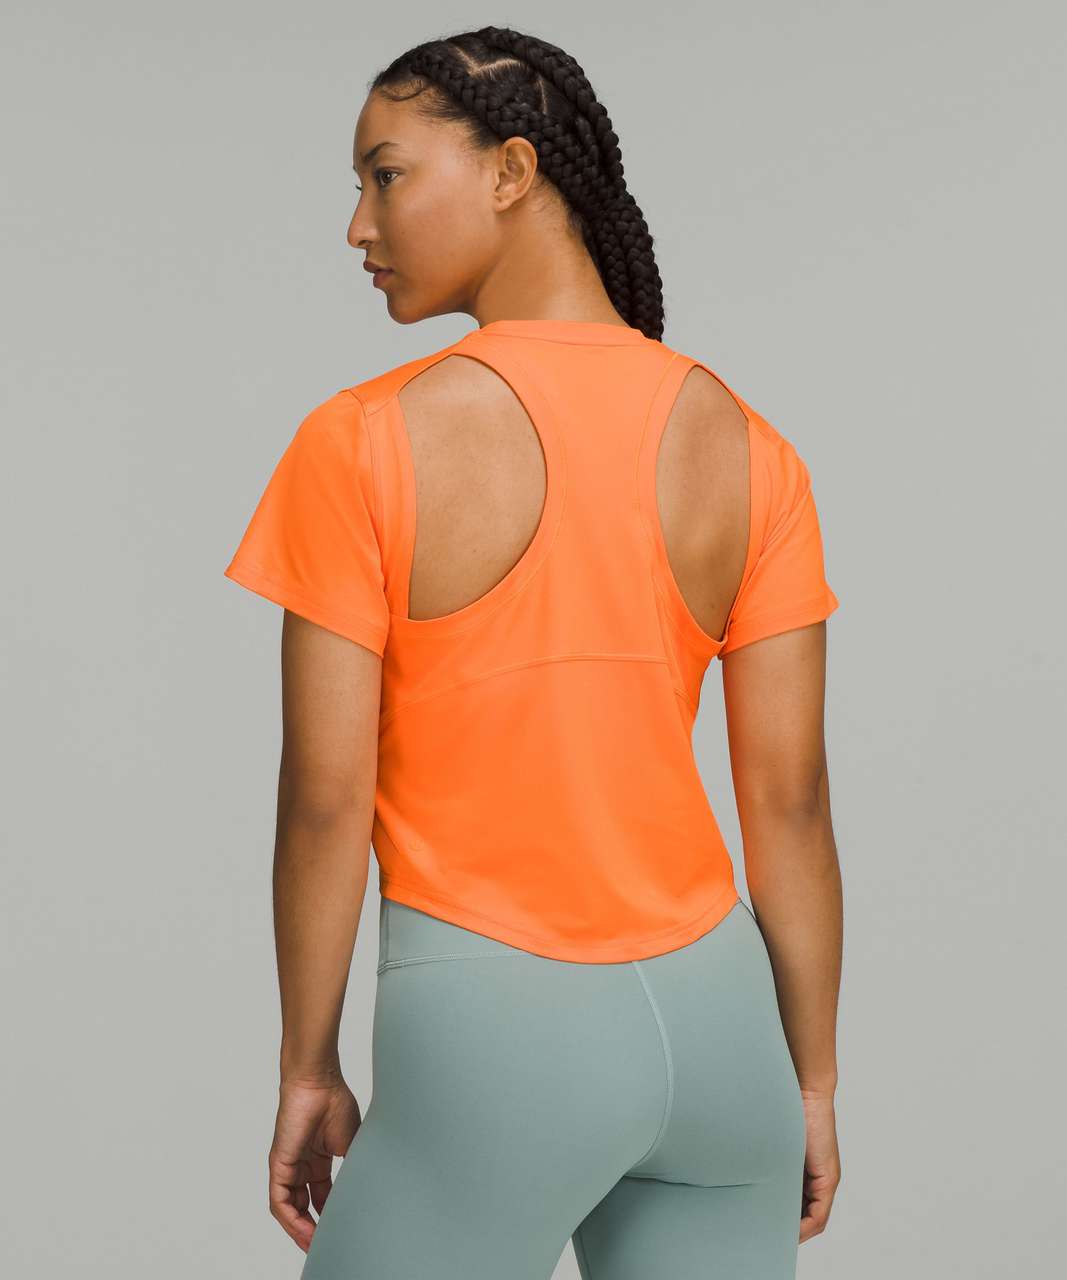 Ventilated Open-Back Training T-Shirt